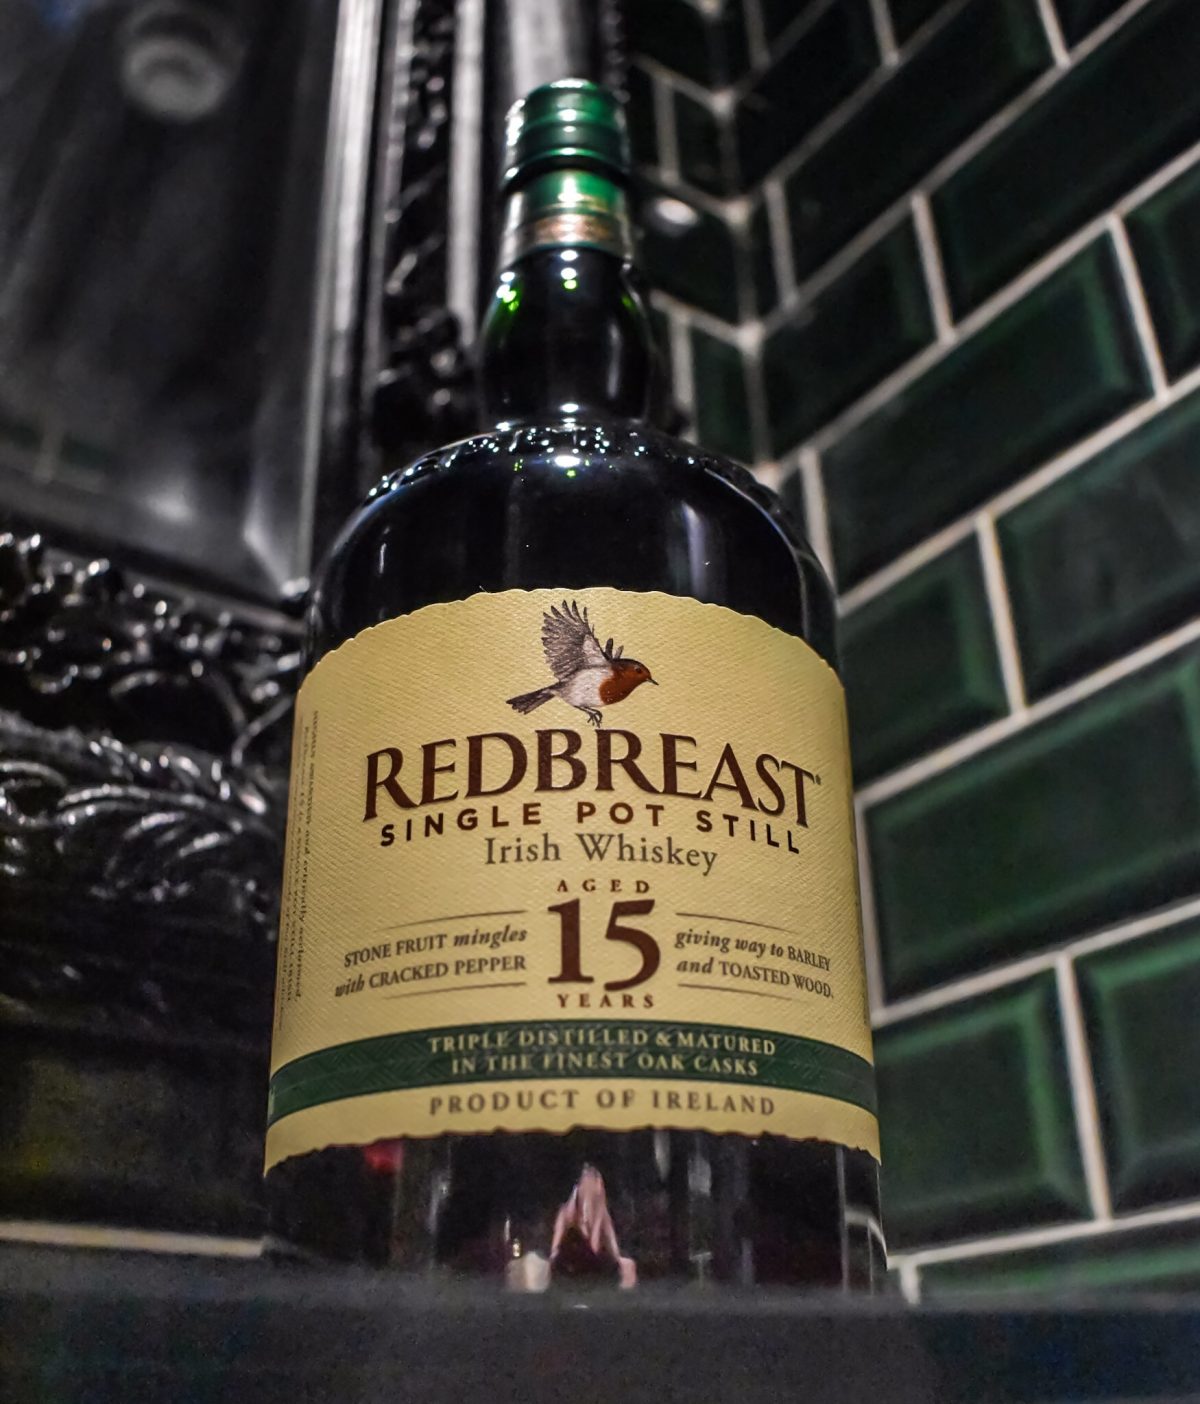 Sunday Tipple with Redbreast